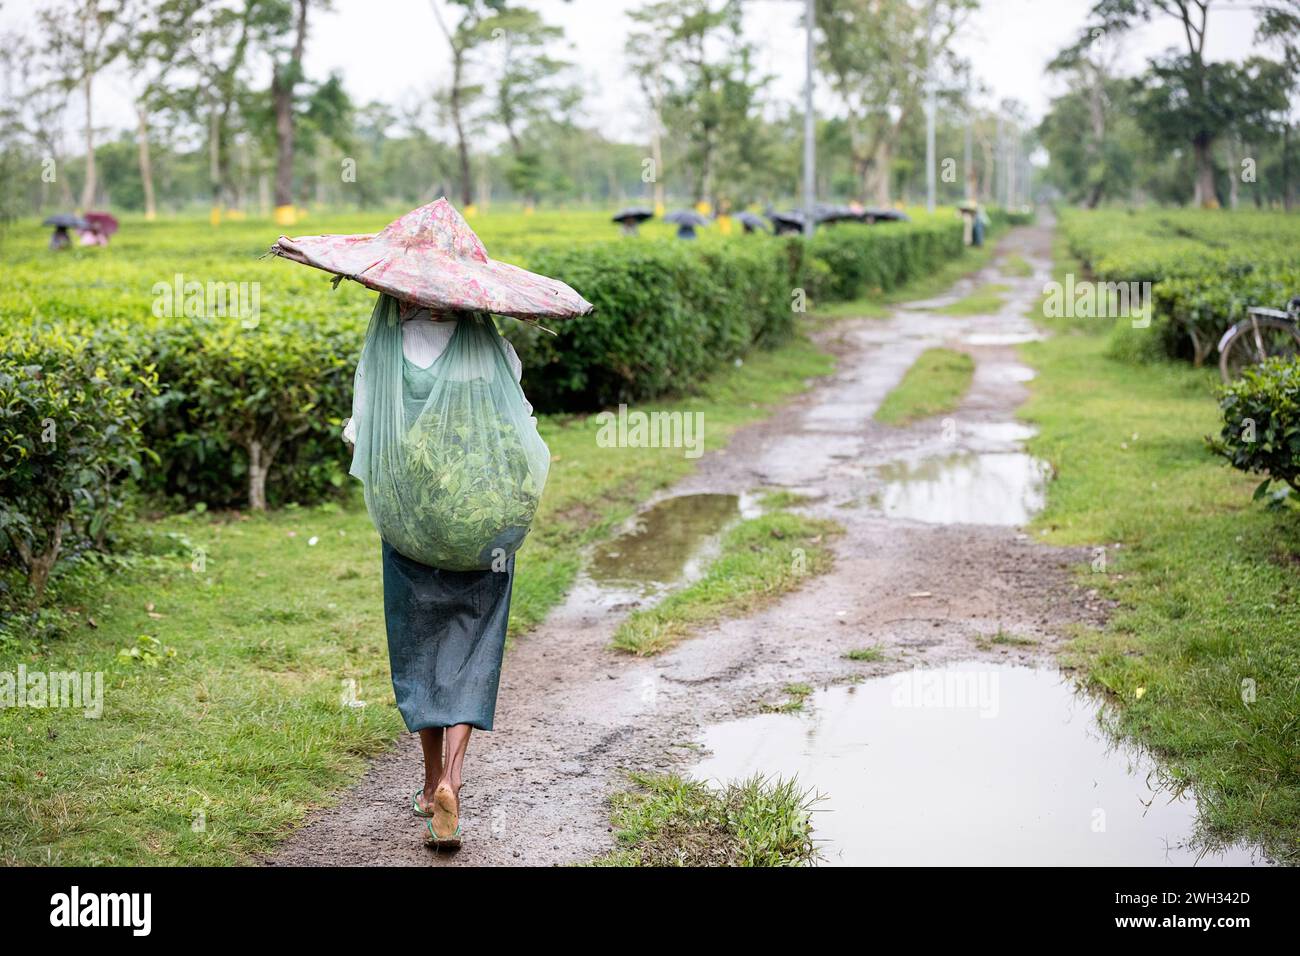 Barefoot indian woman wearing a wide hat carrying on her head a bag filled with tea leaves on a tea plantation near Dibrugarh, Assam, India Stock Photo